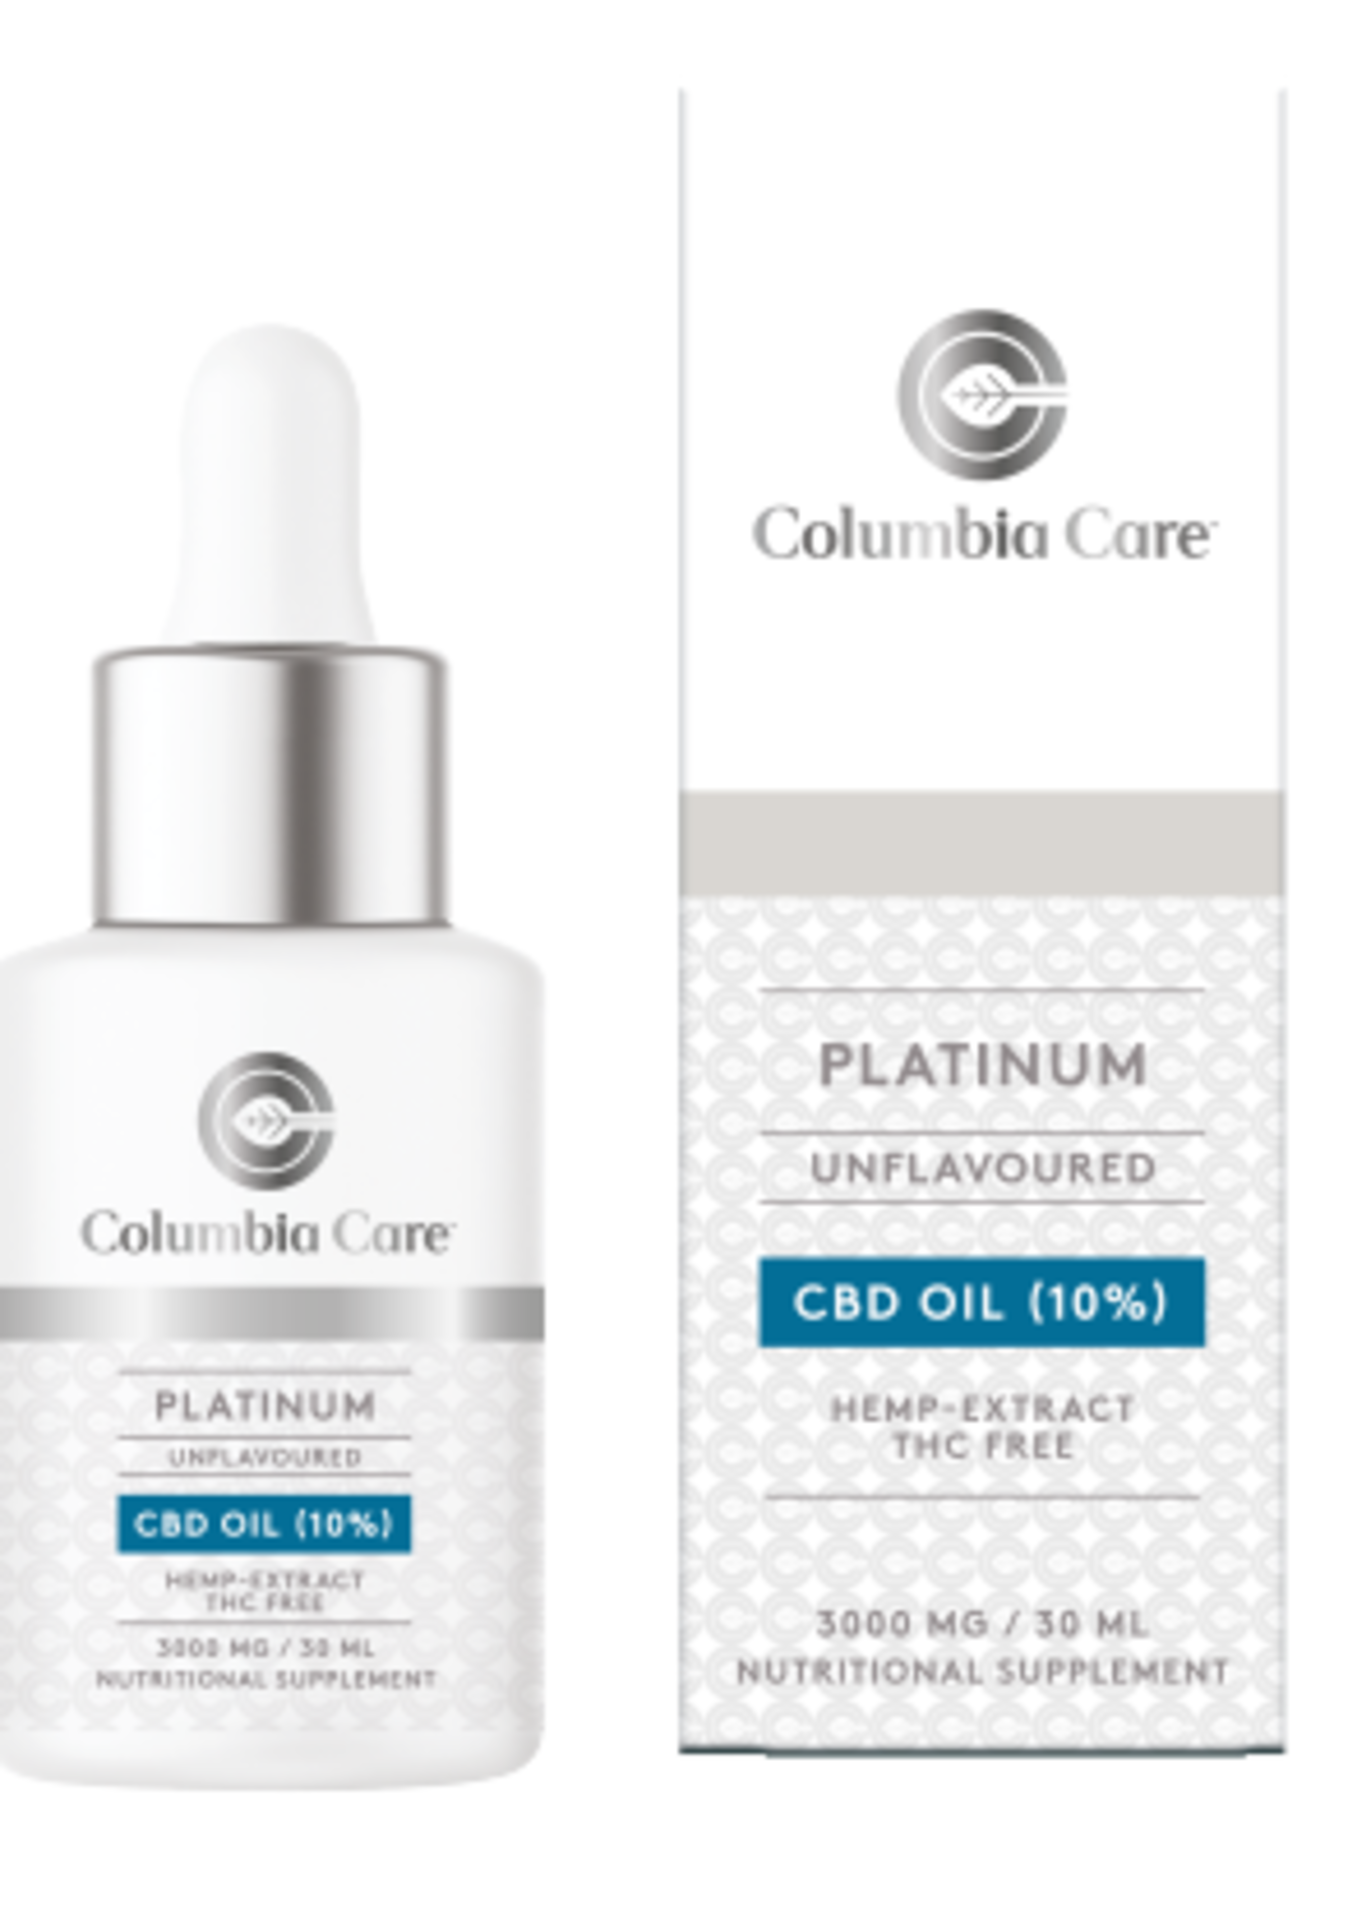 2 x Brand New Columbia Care Platinum Unflavoured Flavored Tincture 10ml 1000mg. Columbia Care, a